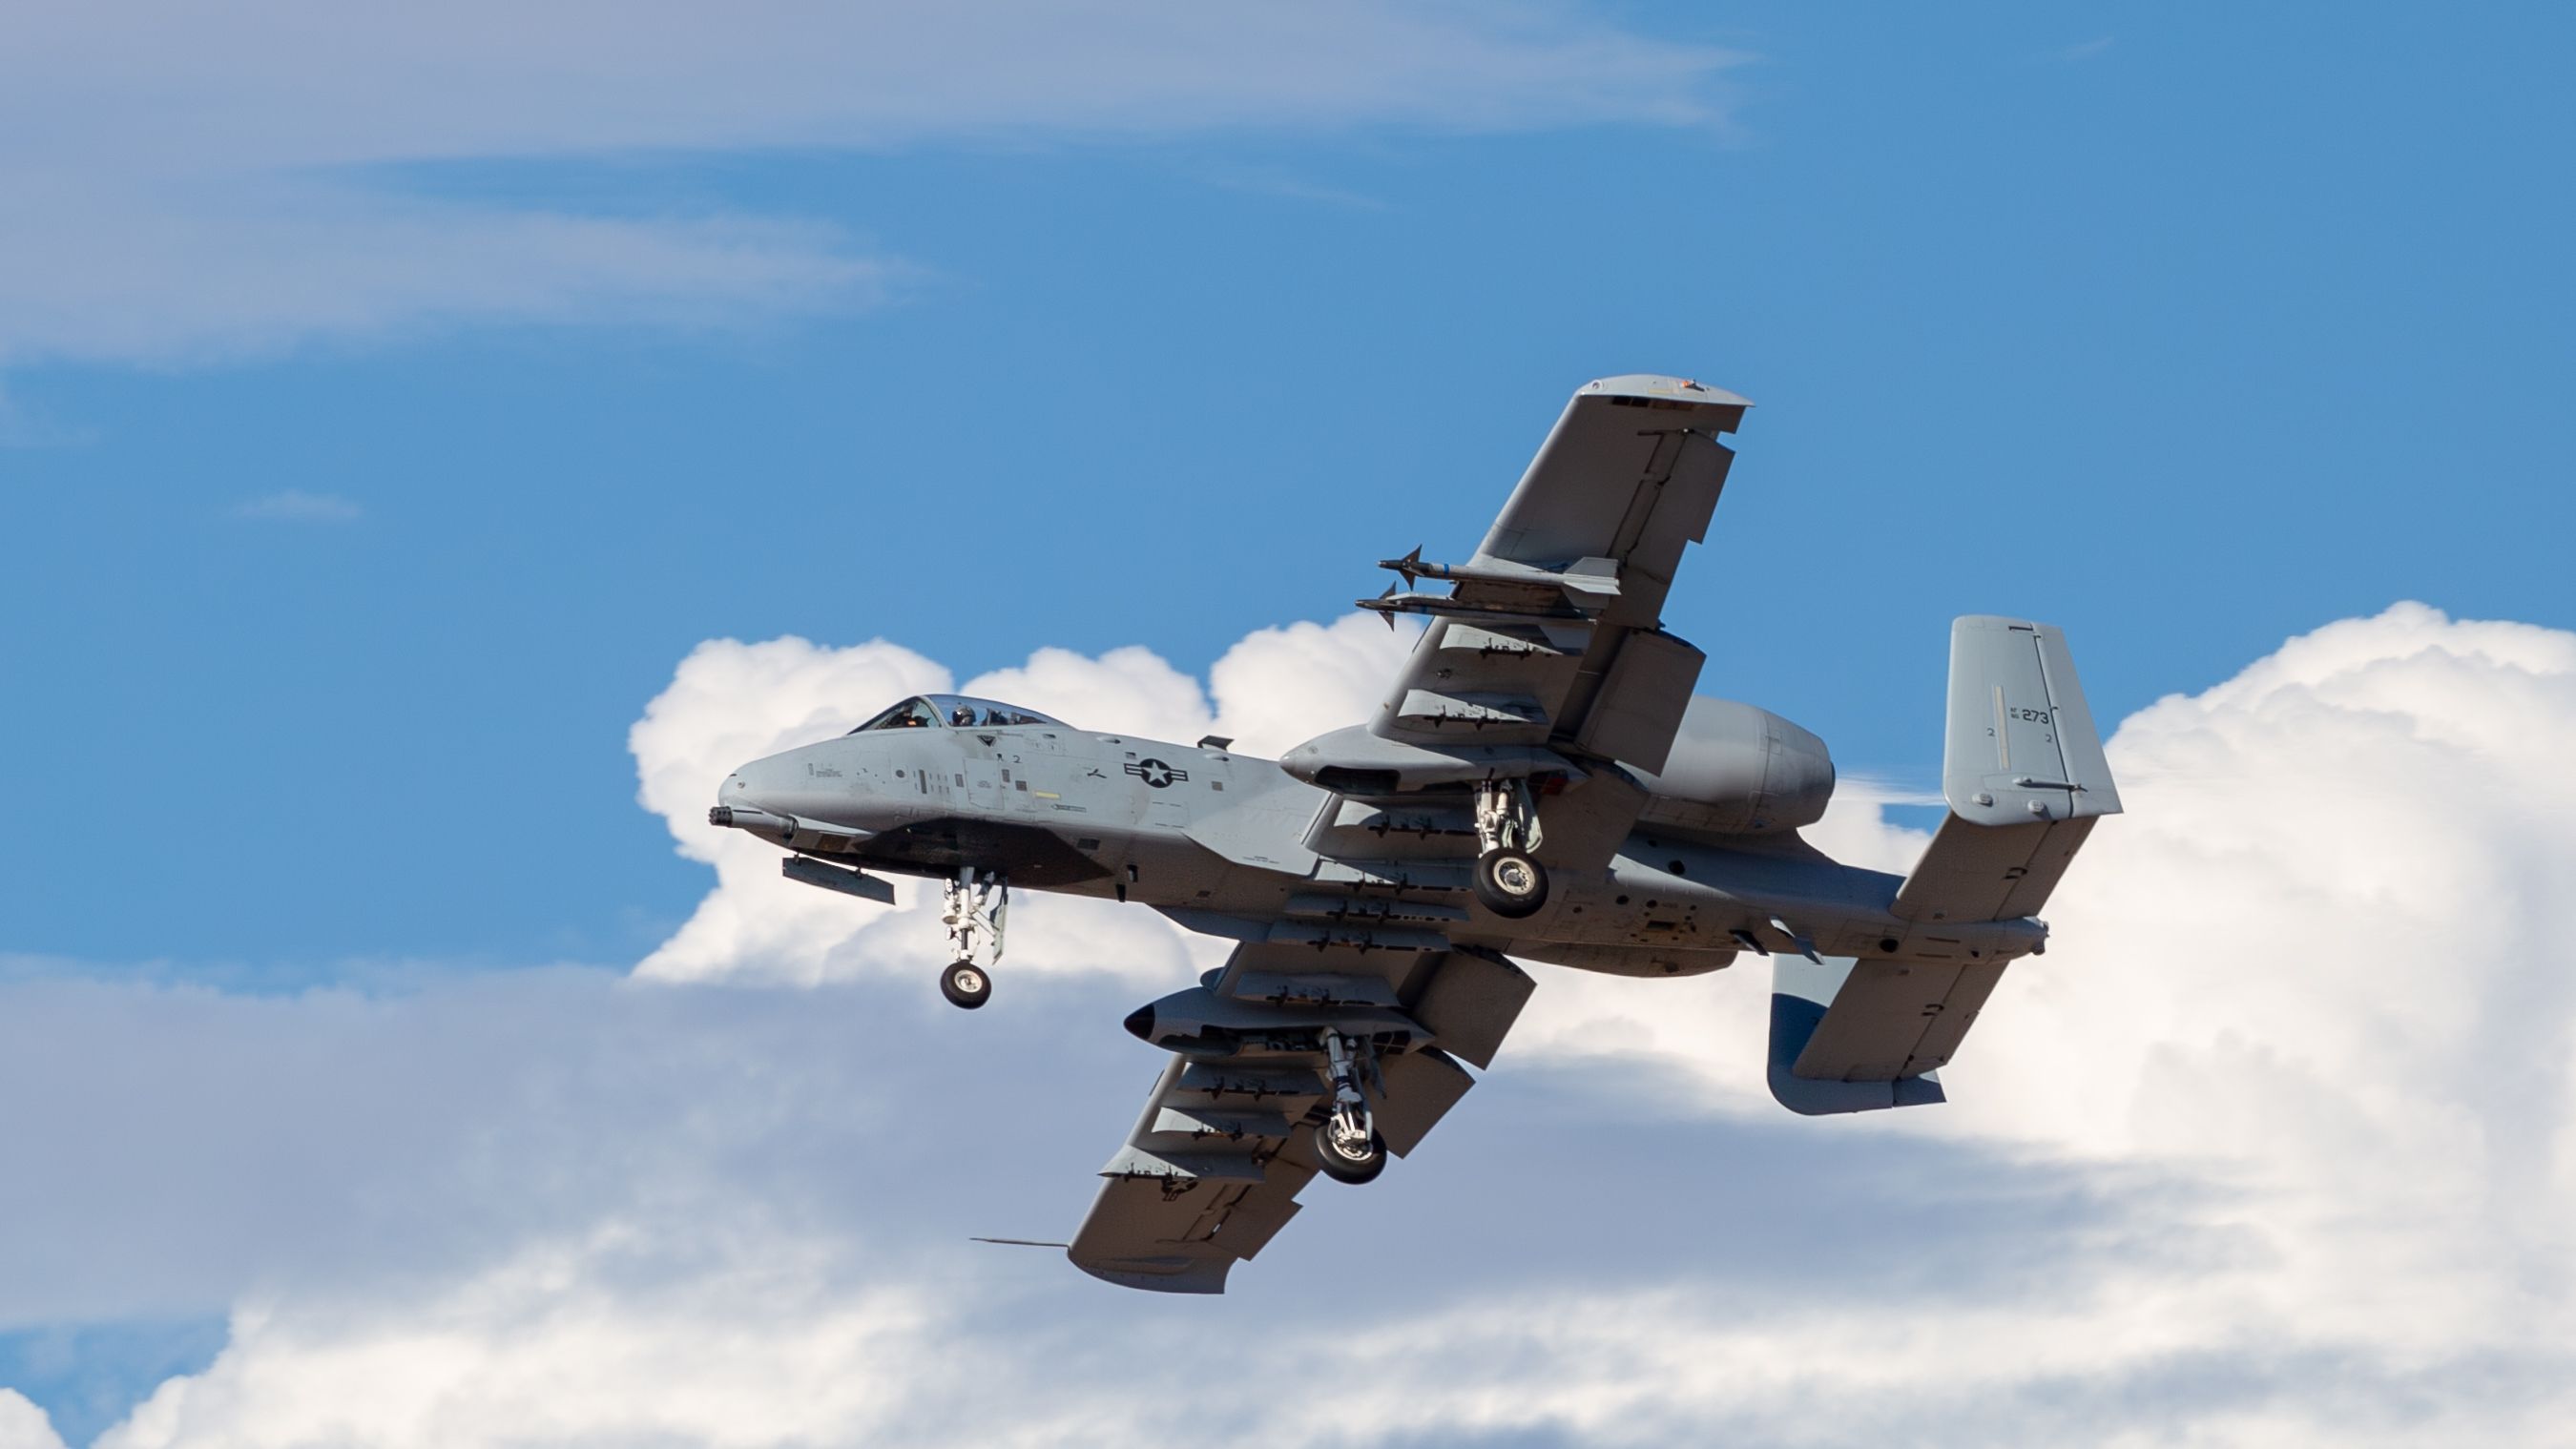 USAF Plans 250 Aircraft Divestment Next Year Including 56 A-10 Warthogs